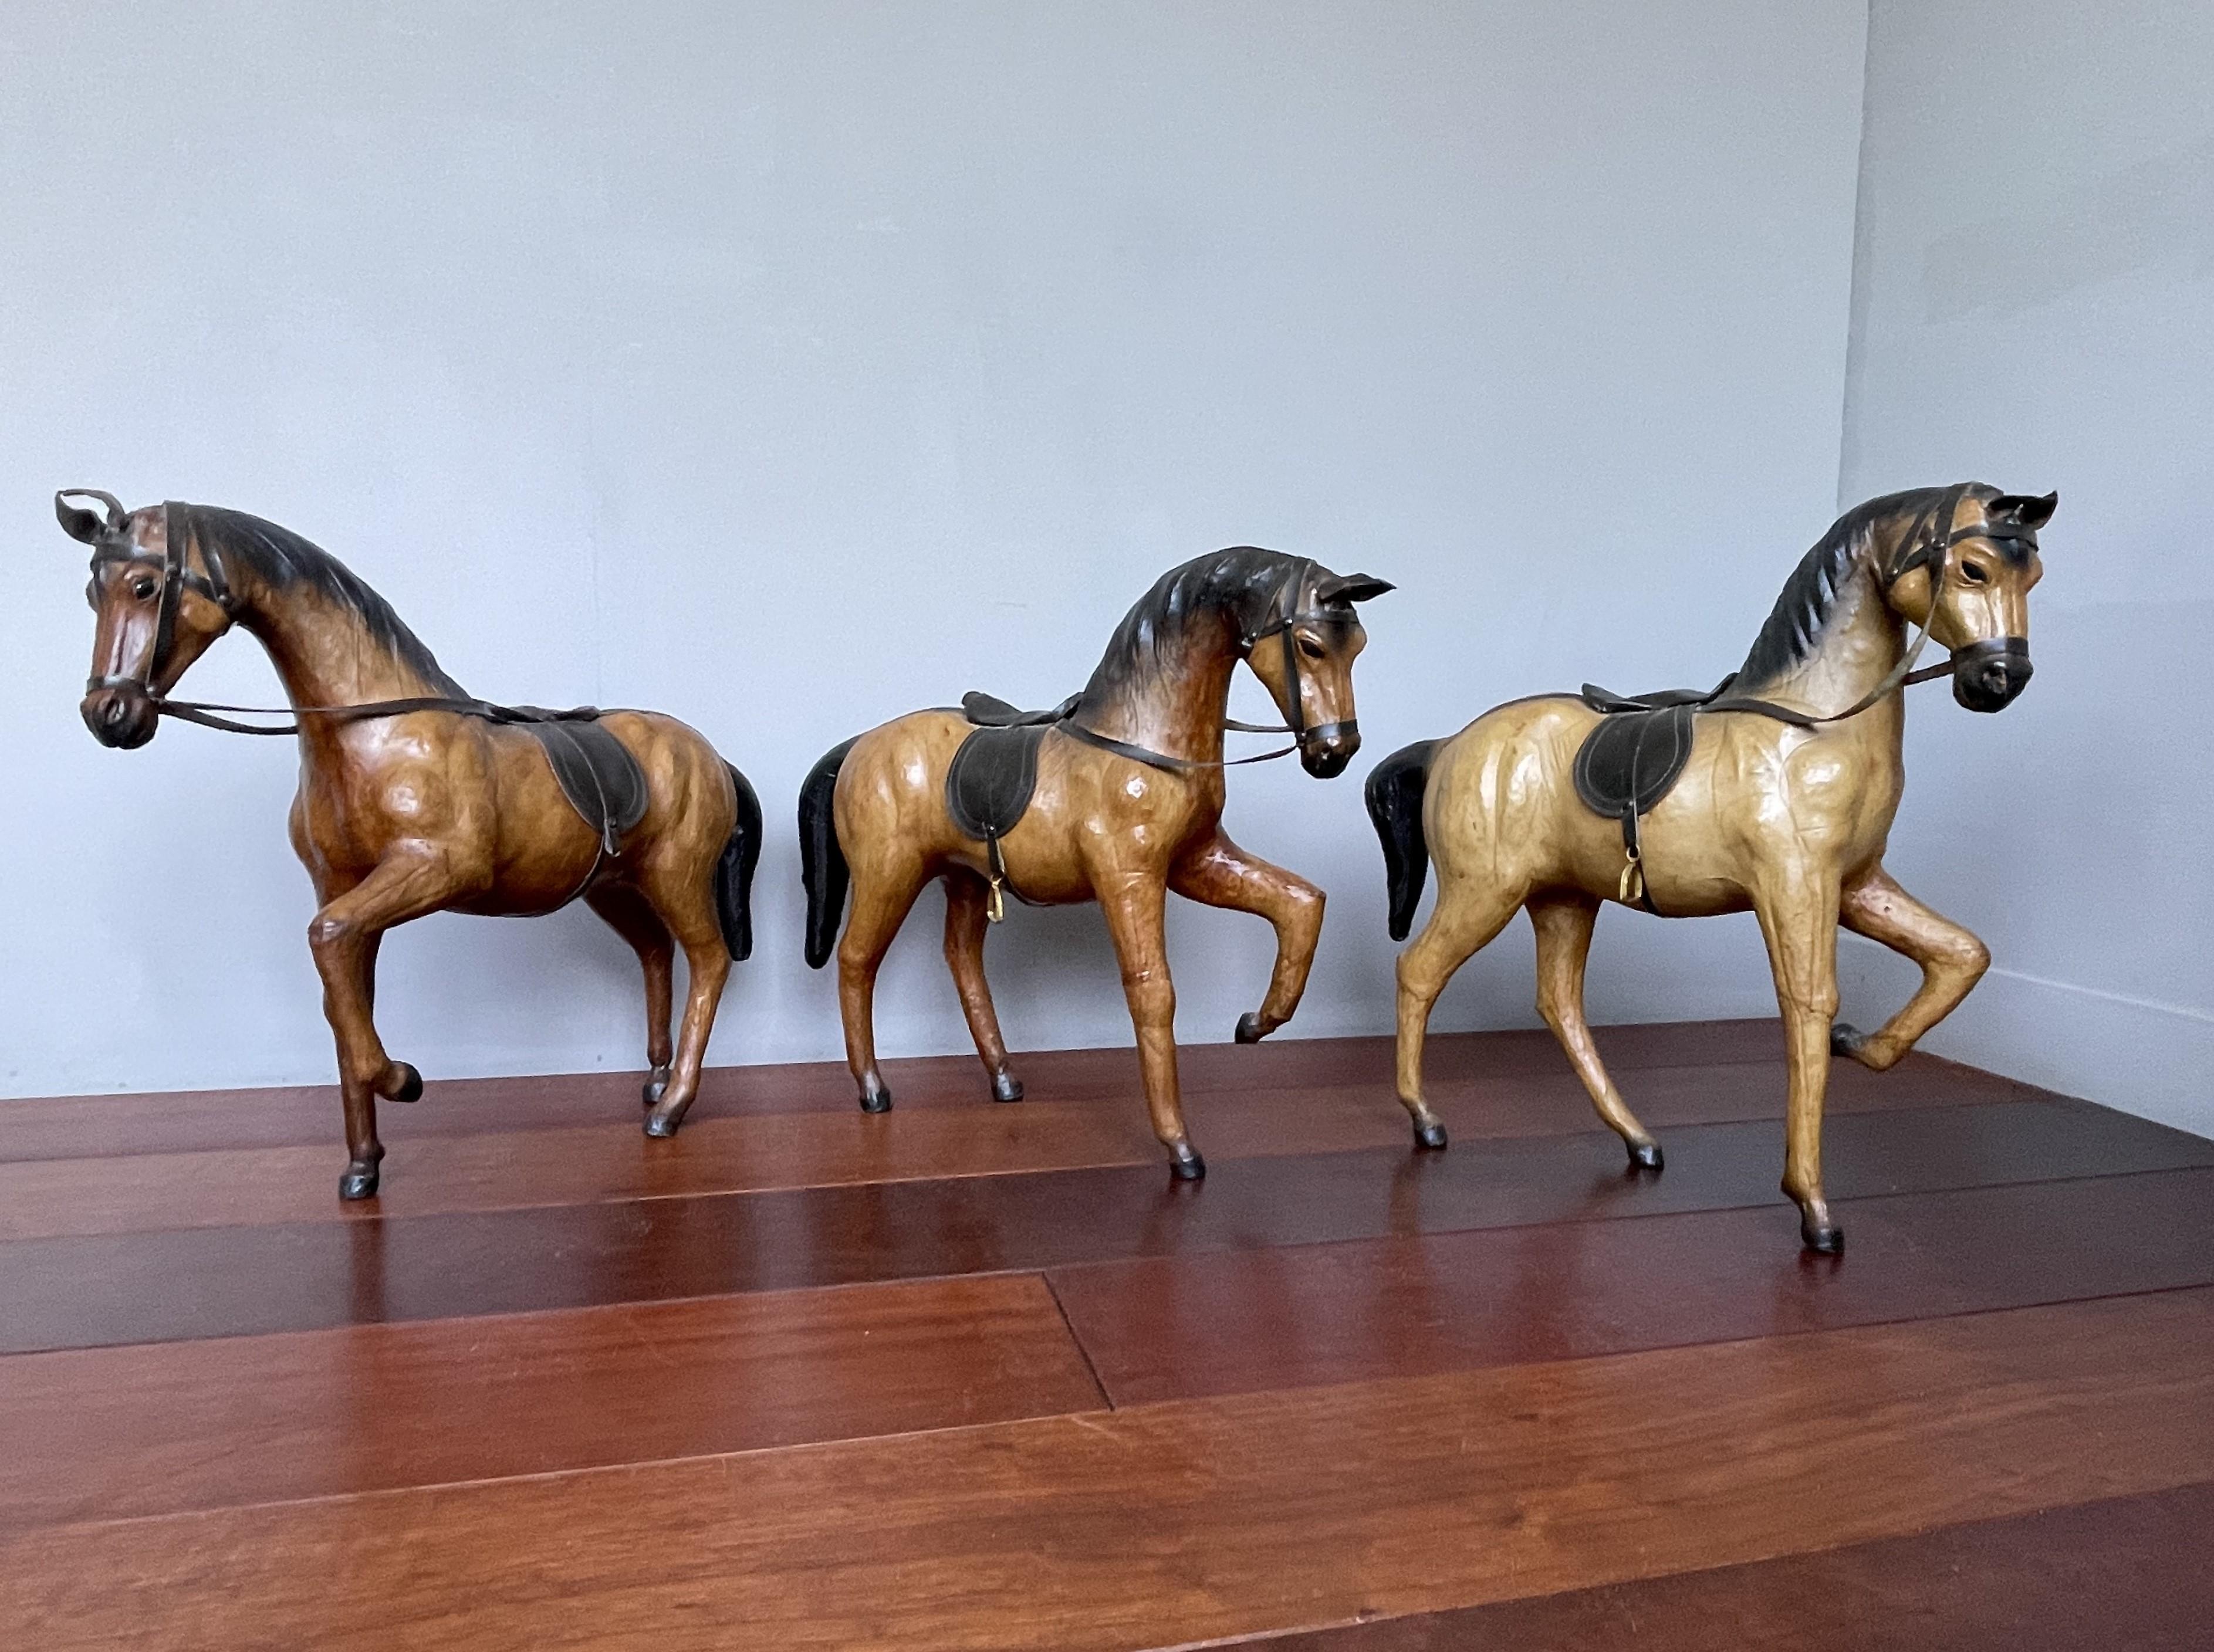 Good Size, finer quality and highly decorative set of horse sculptures, in superb condition !

This very rare set of three thoroughbreds has both great aesthetic and decorative value. Finding one of these rare and better quality horses would have